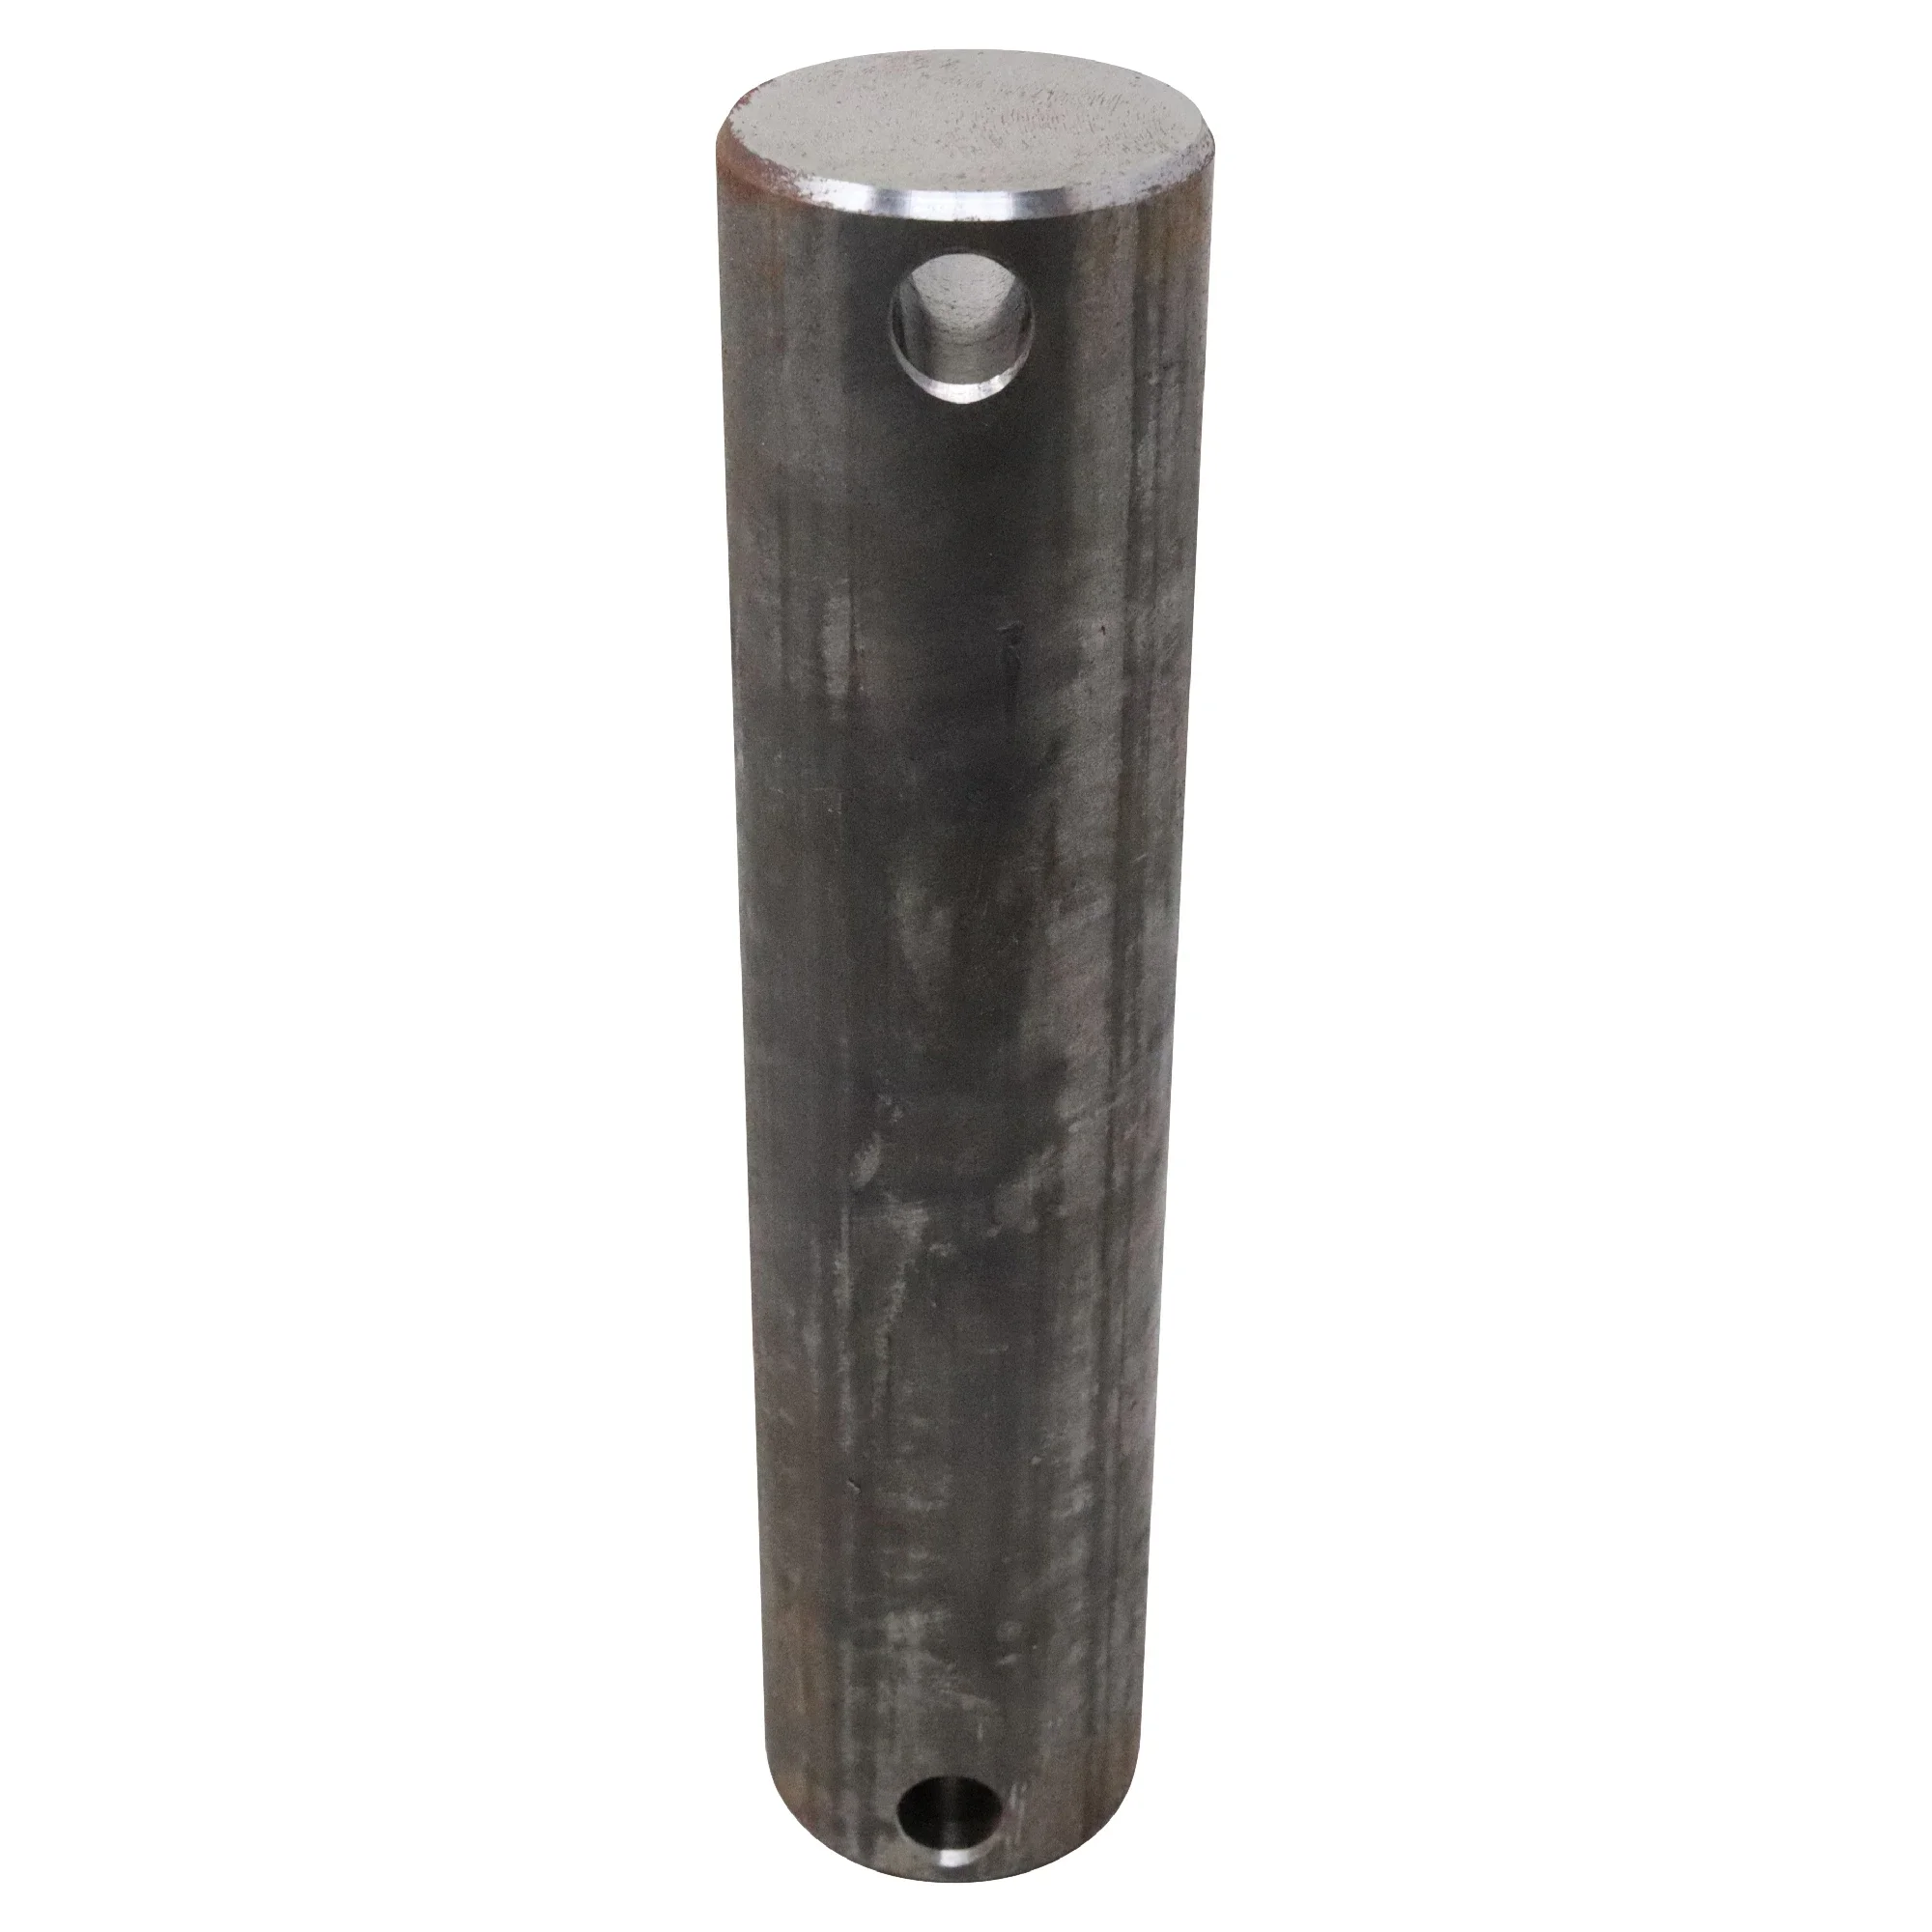 Wastebuilt® Replacement for Heil Cylinder Pin